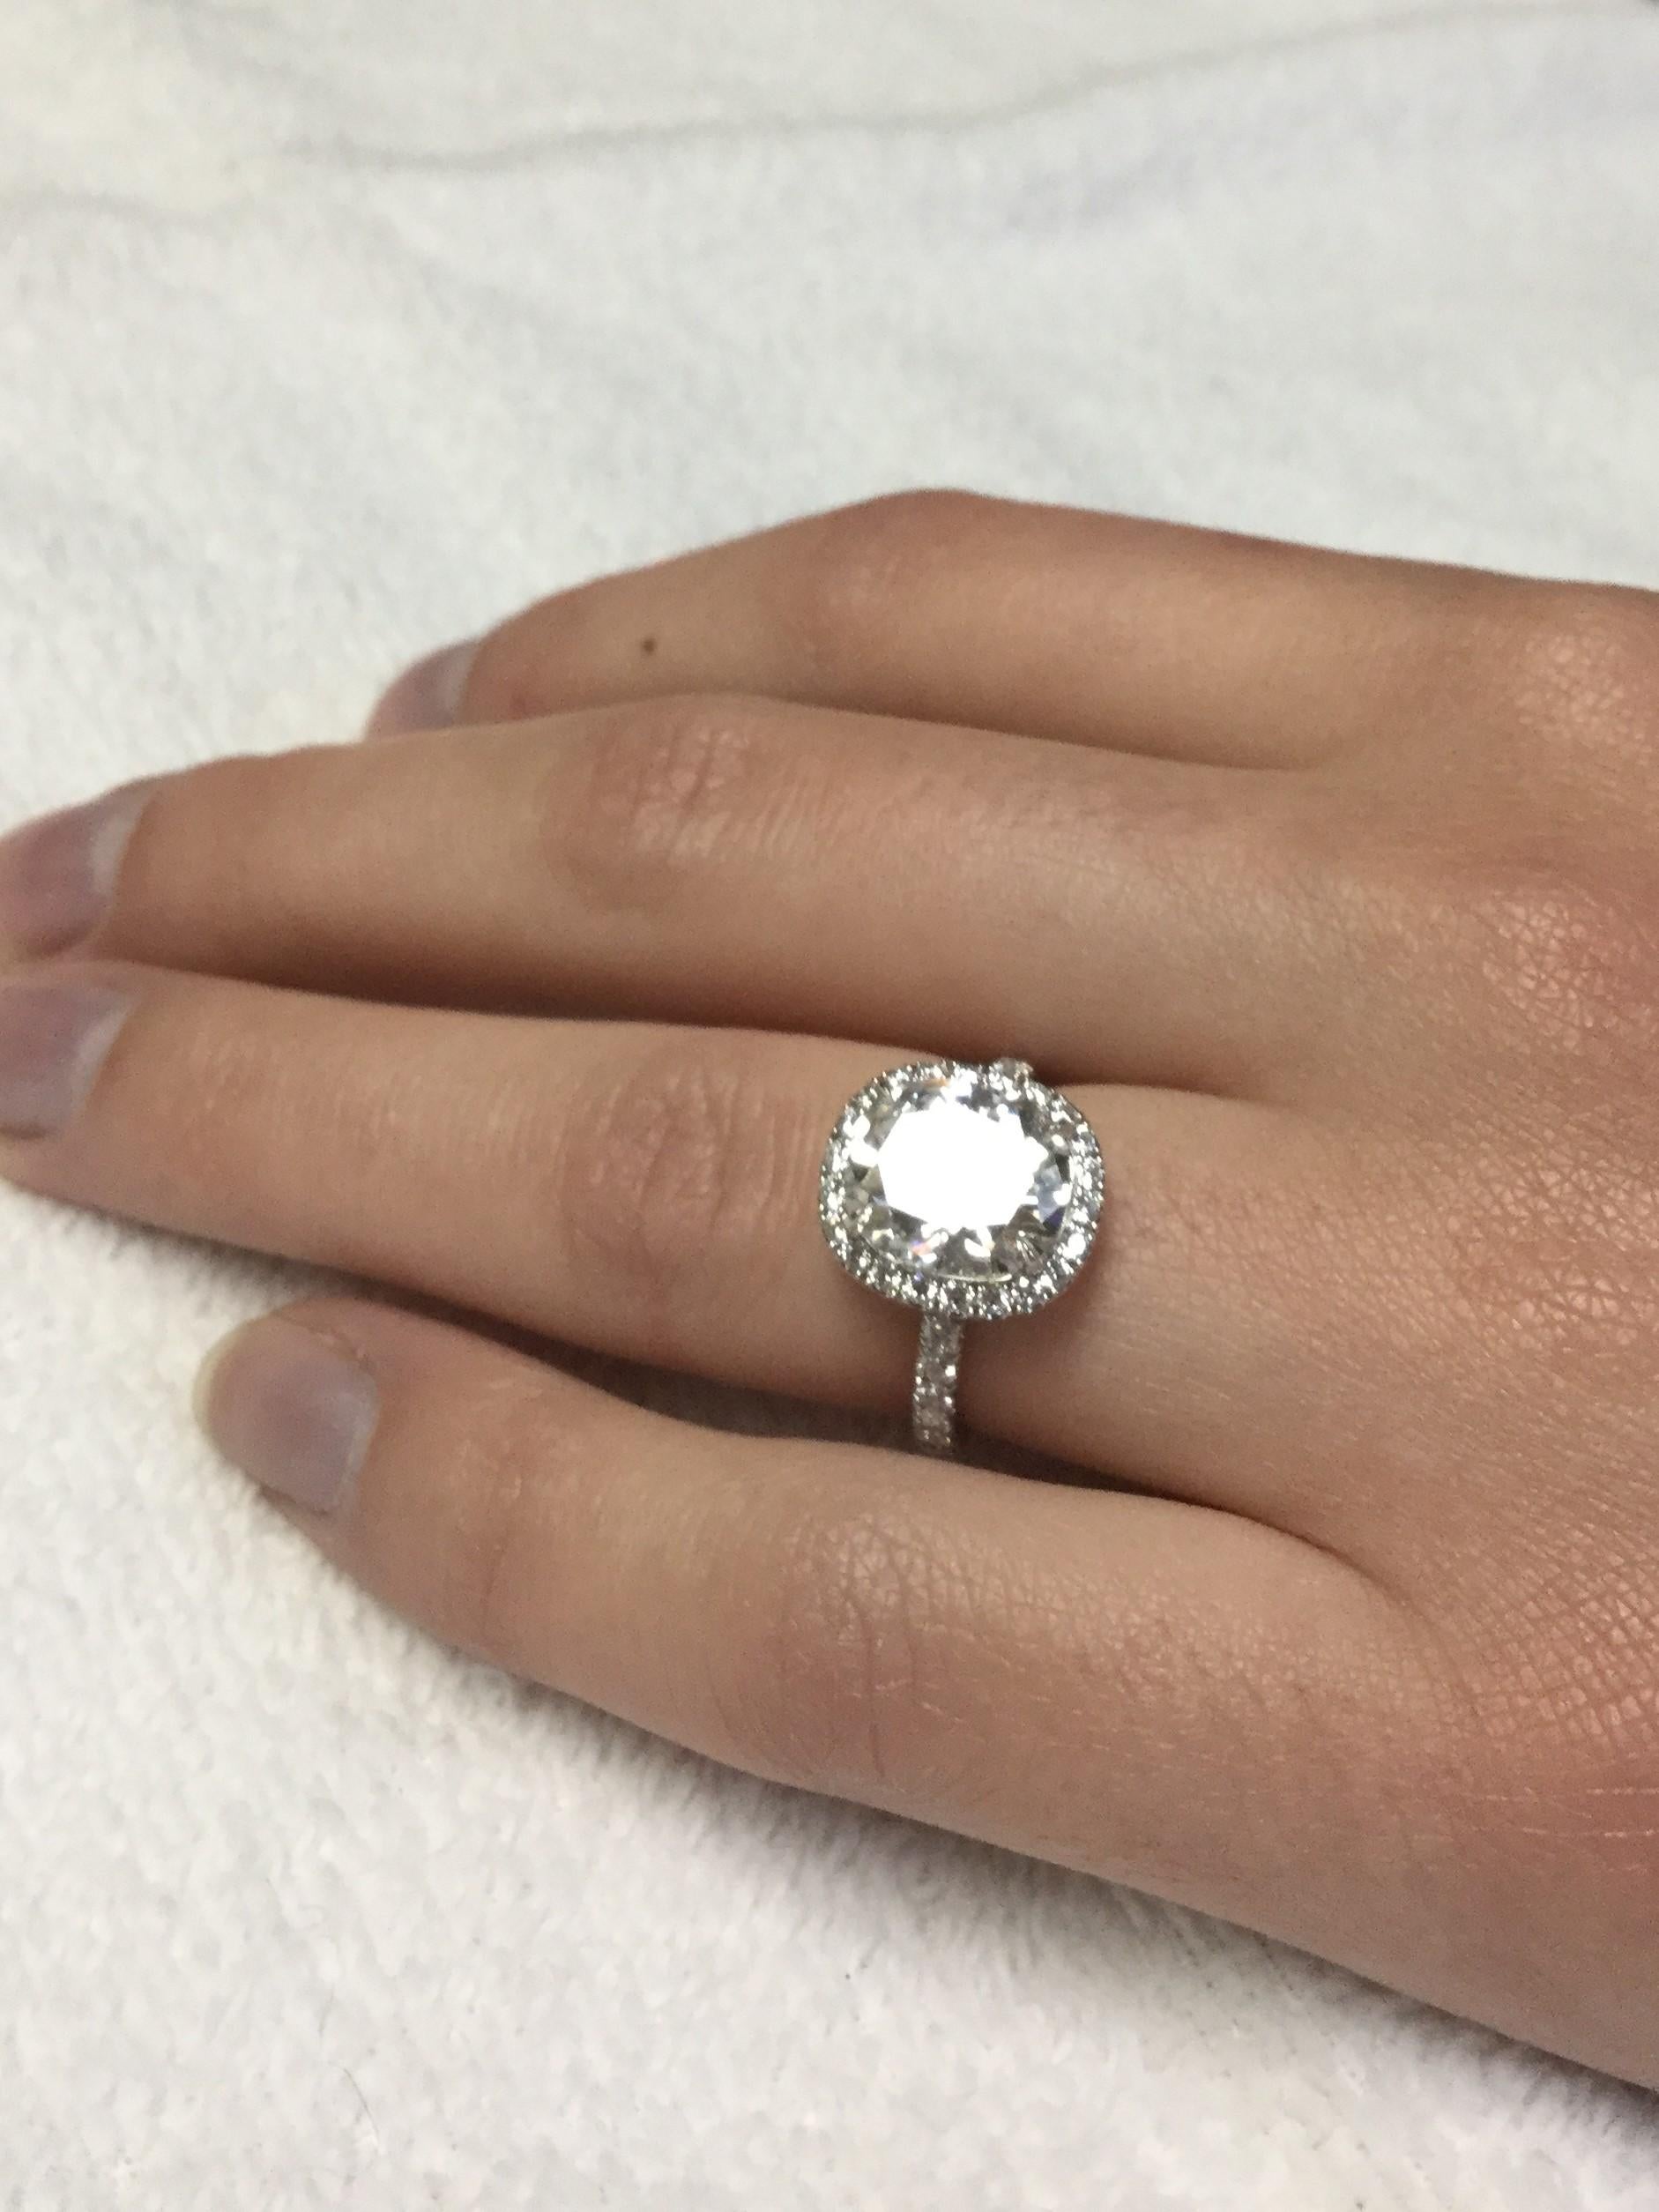 Harry Winston Platinum Cushion Cut Diamond Engagement Ring GIA 3.41 Carat In Excellent Condition For Sale In Wilton, CT